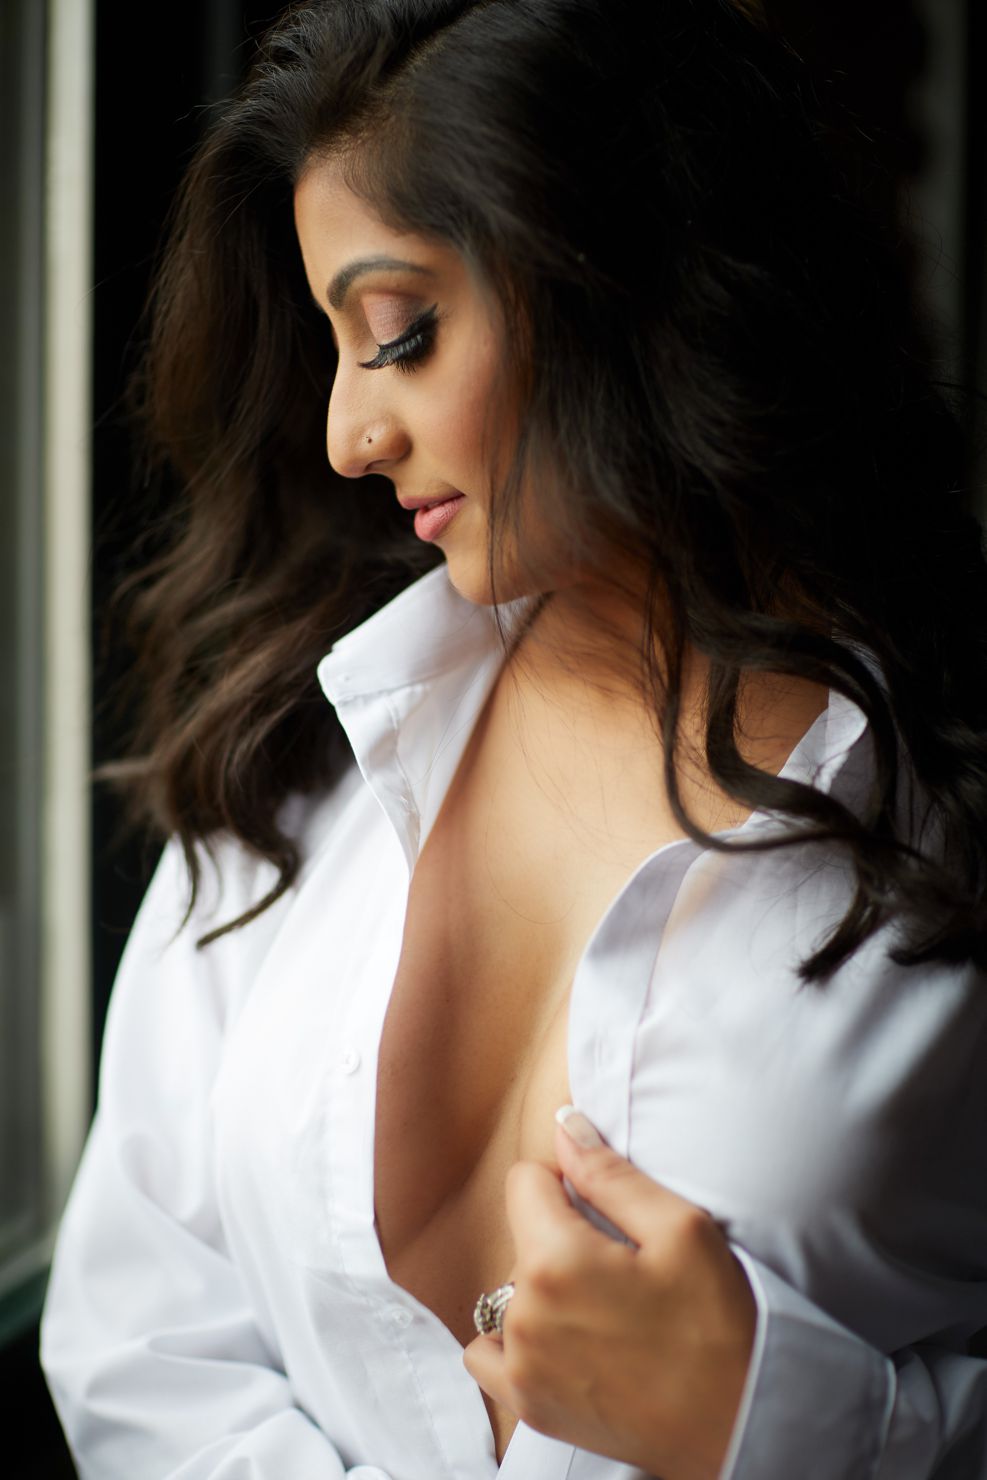 woman looking down wearing button up white shirt boudoir photography chicago